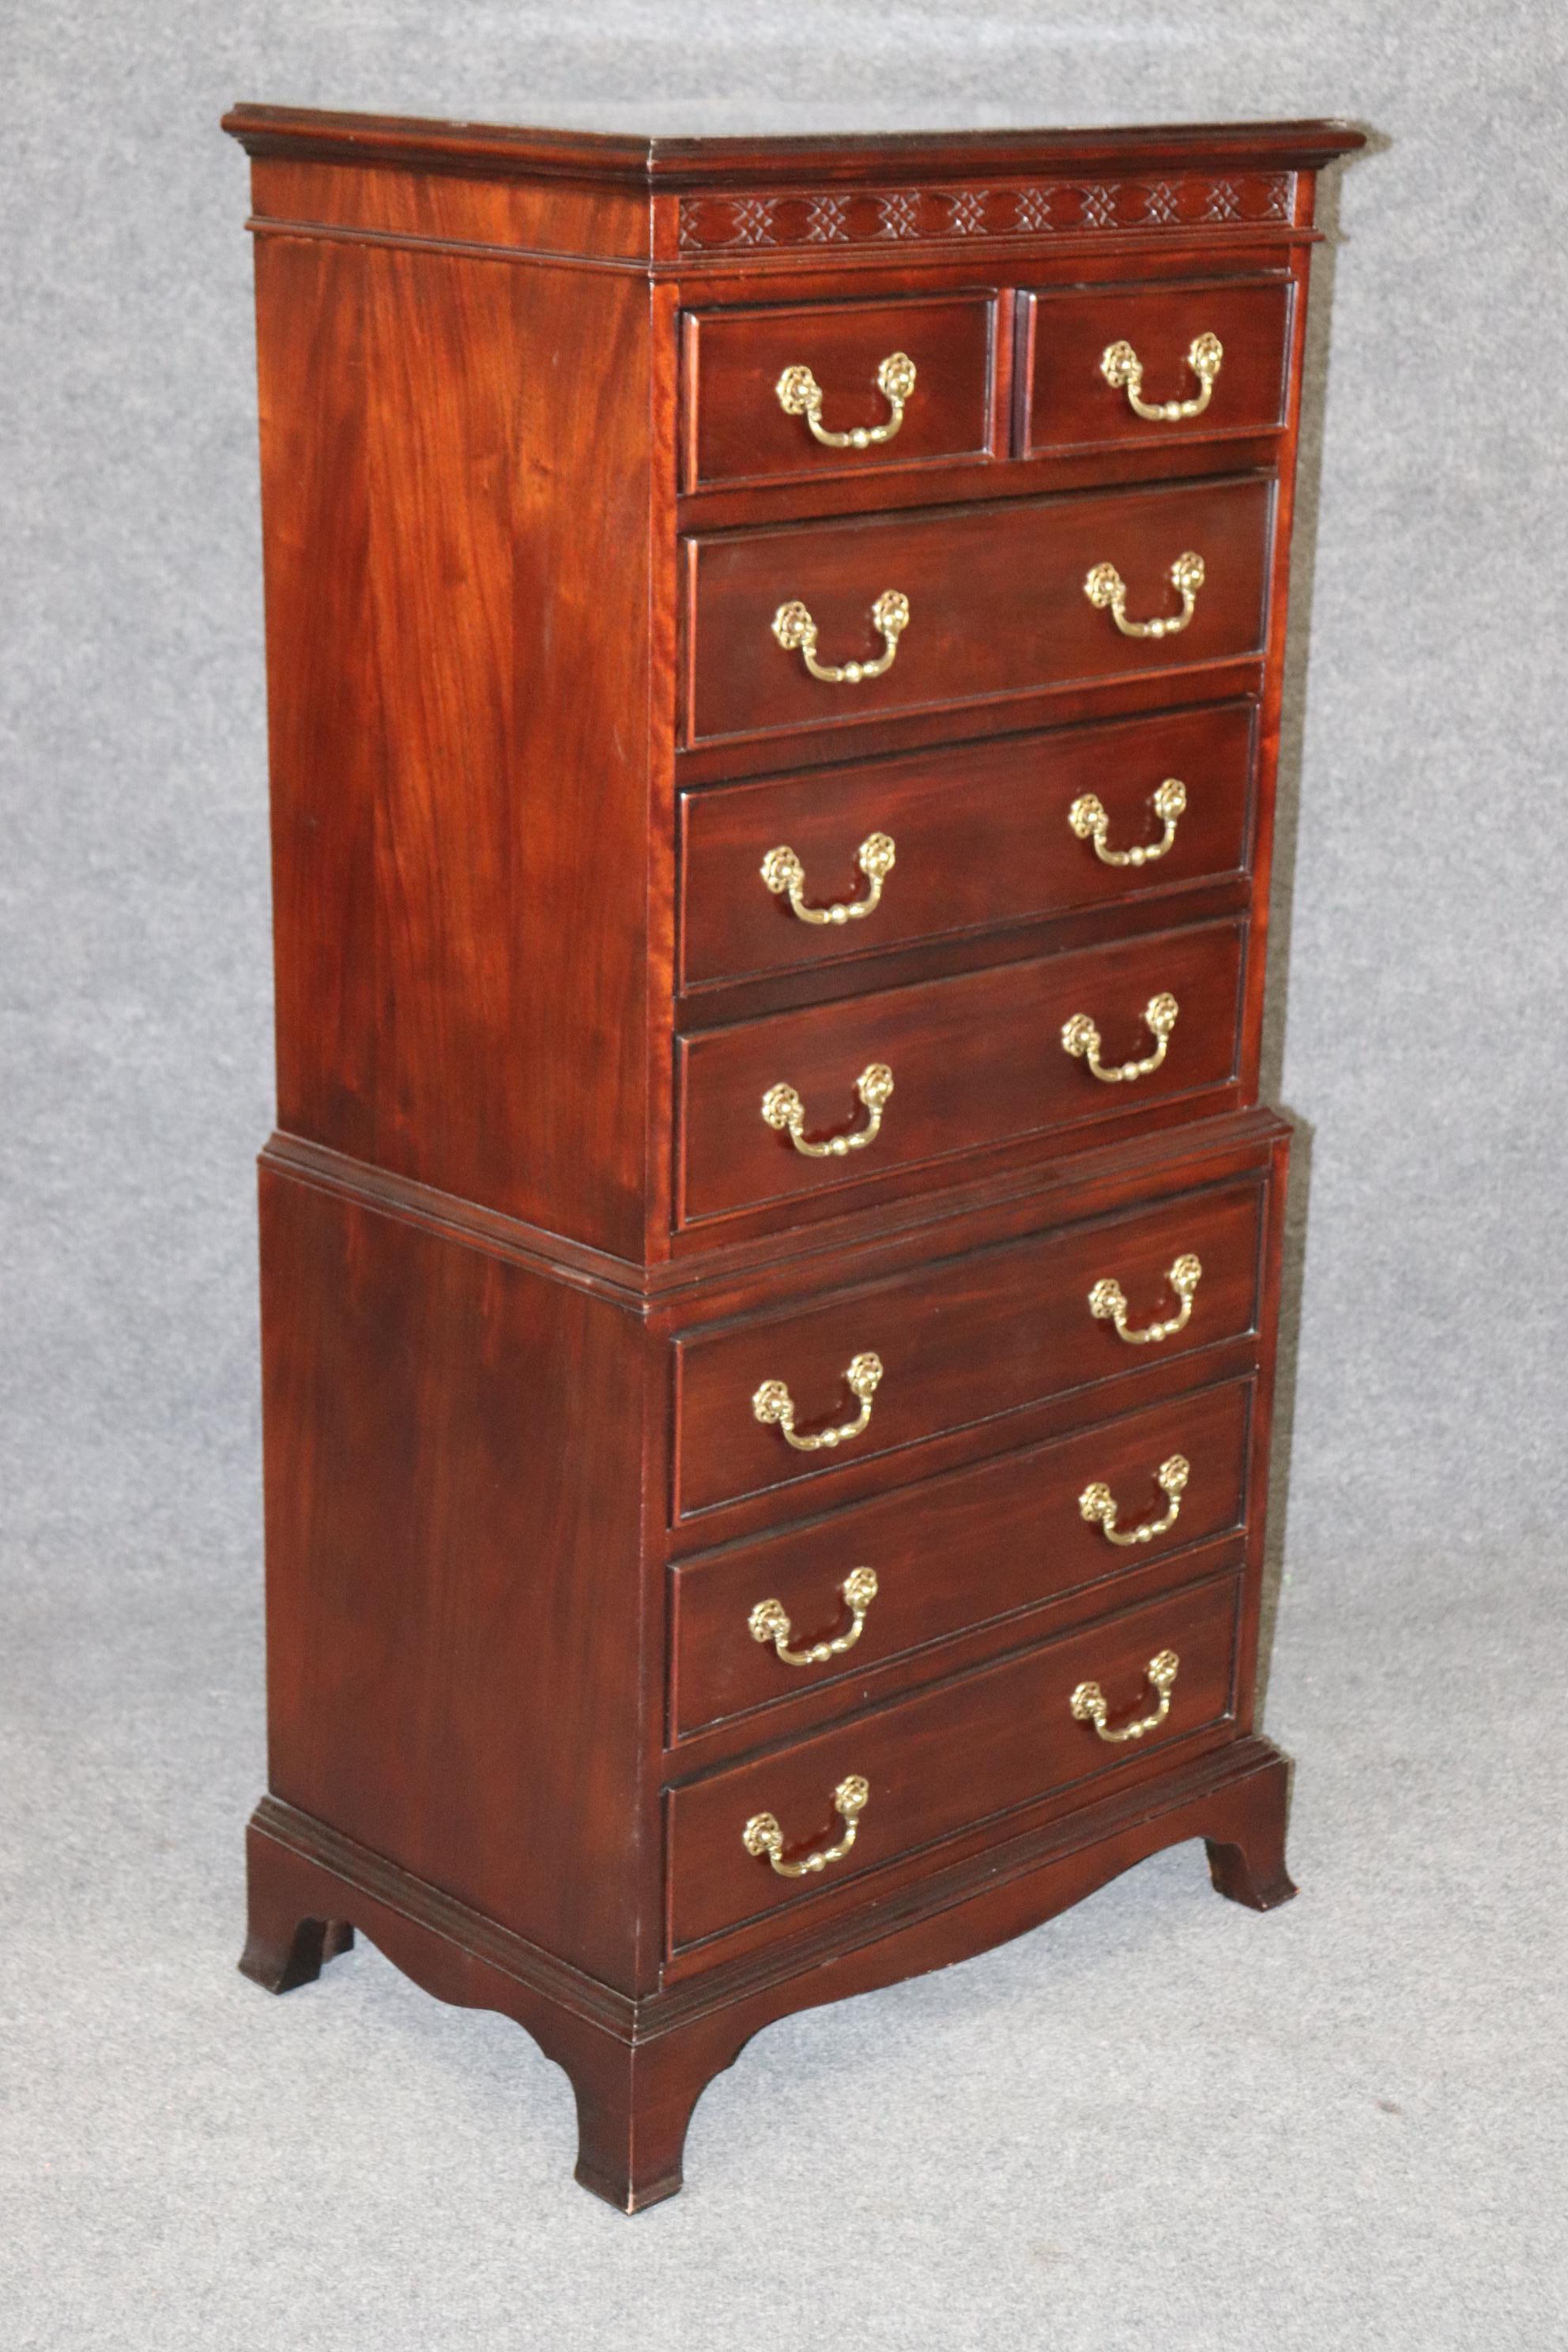 This is a gorgeous solid mahogany and brass Chippendale style high chest of smaller proportions and stature. This piece is in good vintage condition and has only minor signs of age and use and no significant scratches or issues to mention. The